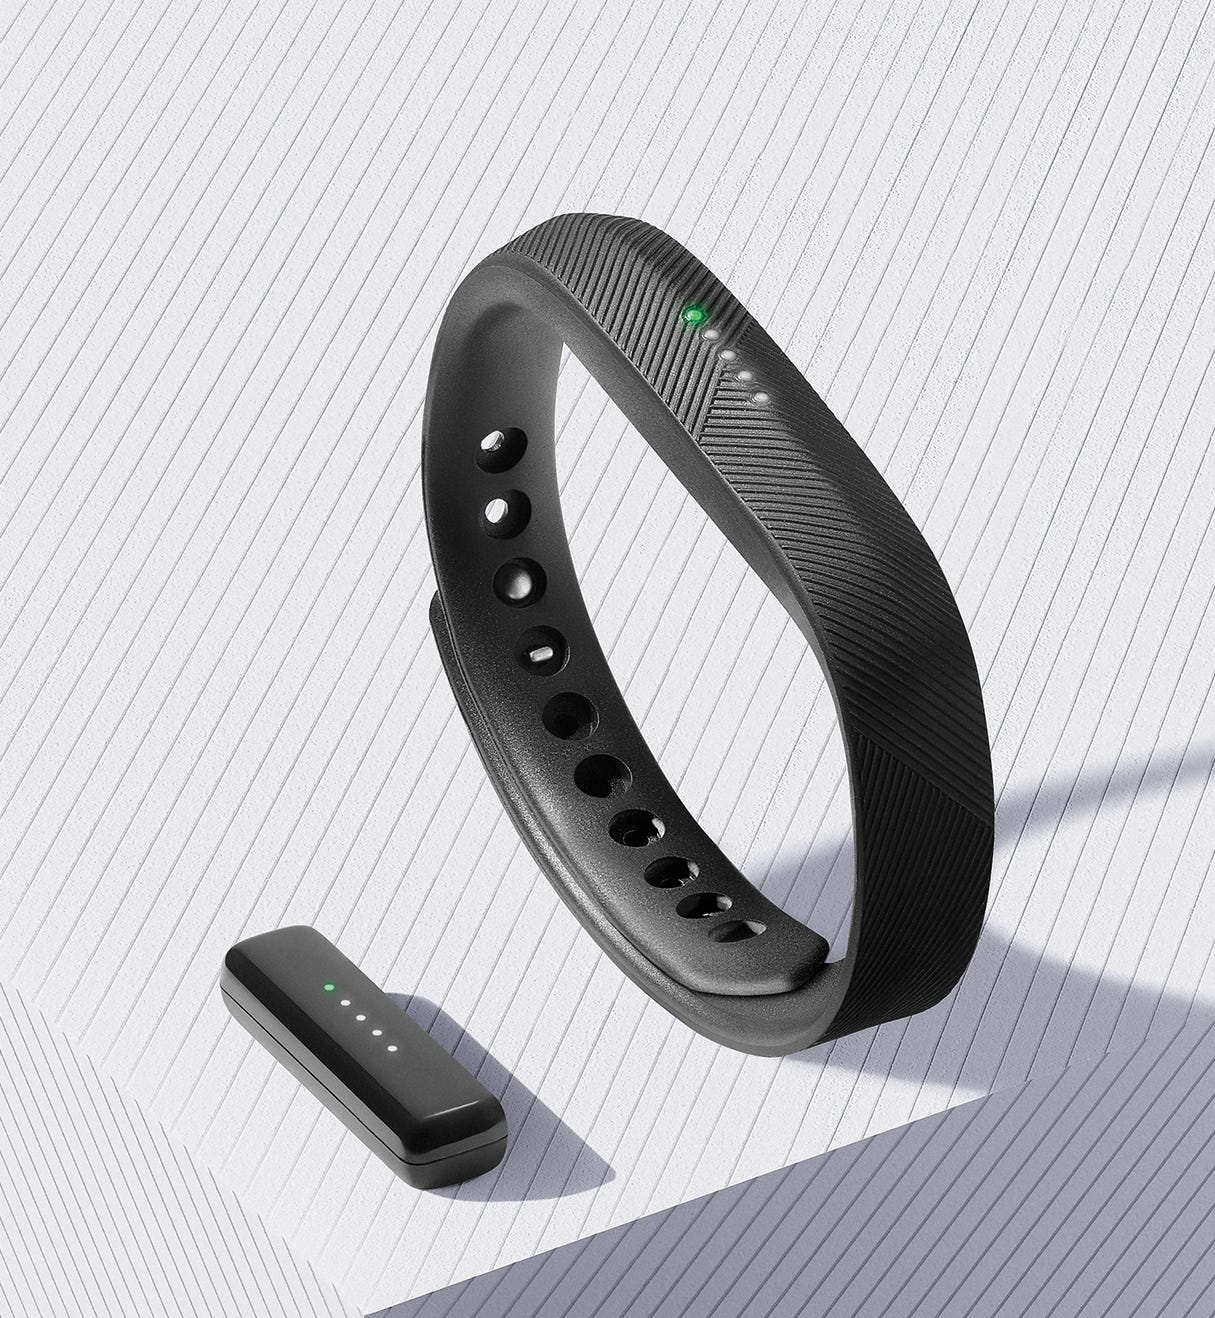 Fitbit unveils new tracker for swimming